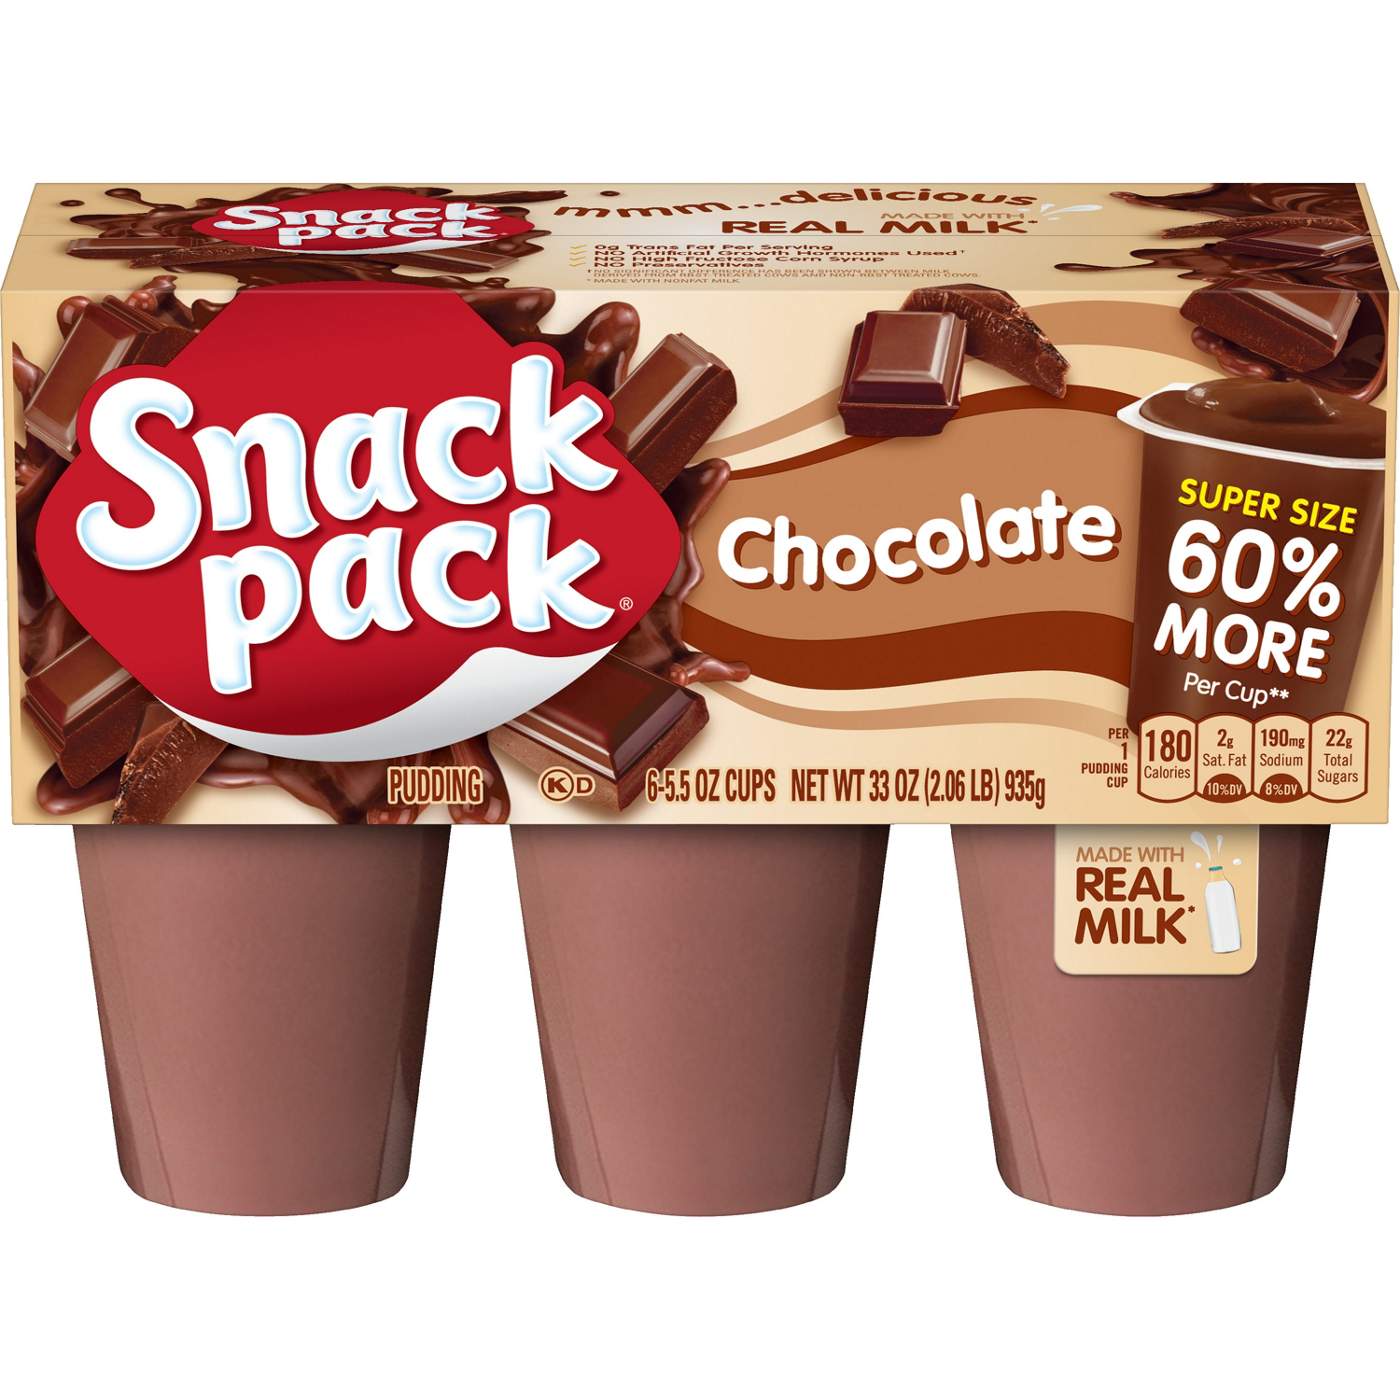 Snack Pack Super Size Chocolate Pudding Cups; image 1 of 7